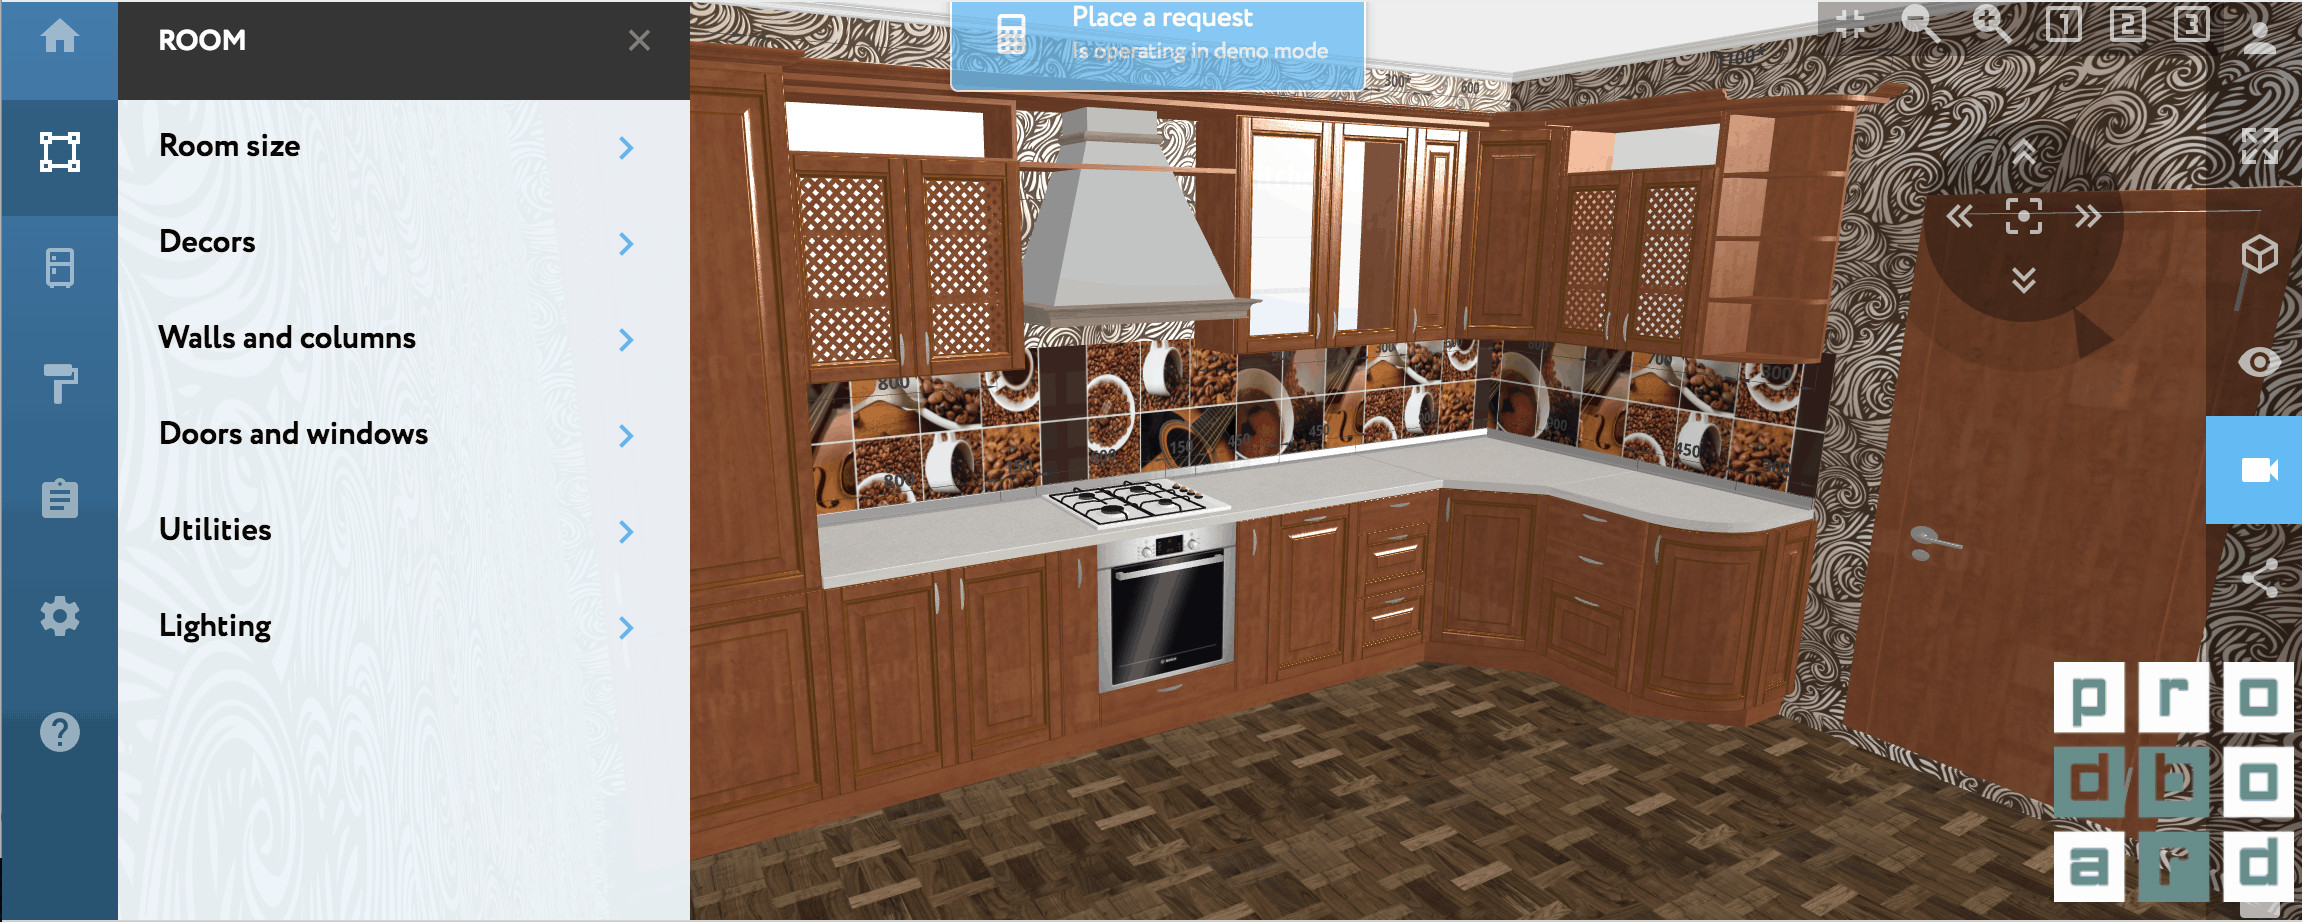 20 Incredible Kitchen Remodeling App – Home, Family, Style and Art Ideas